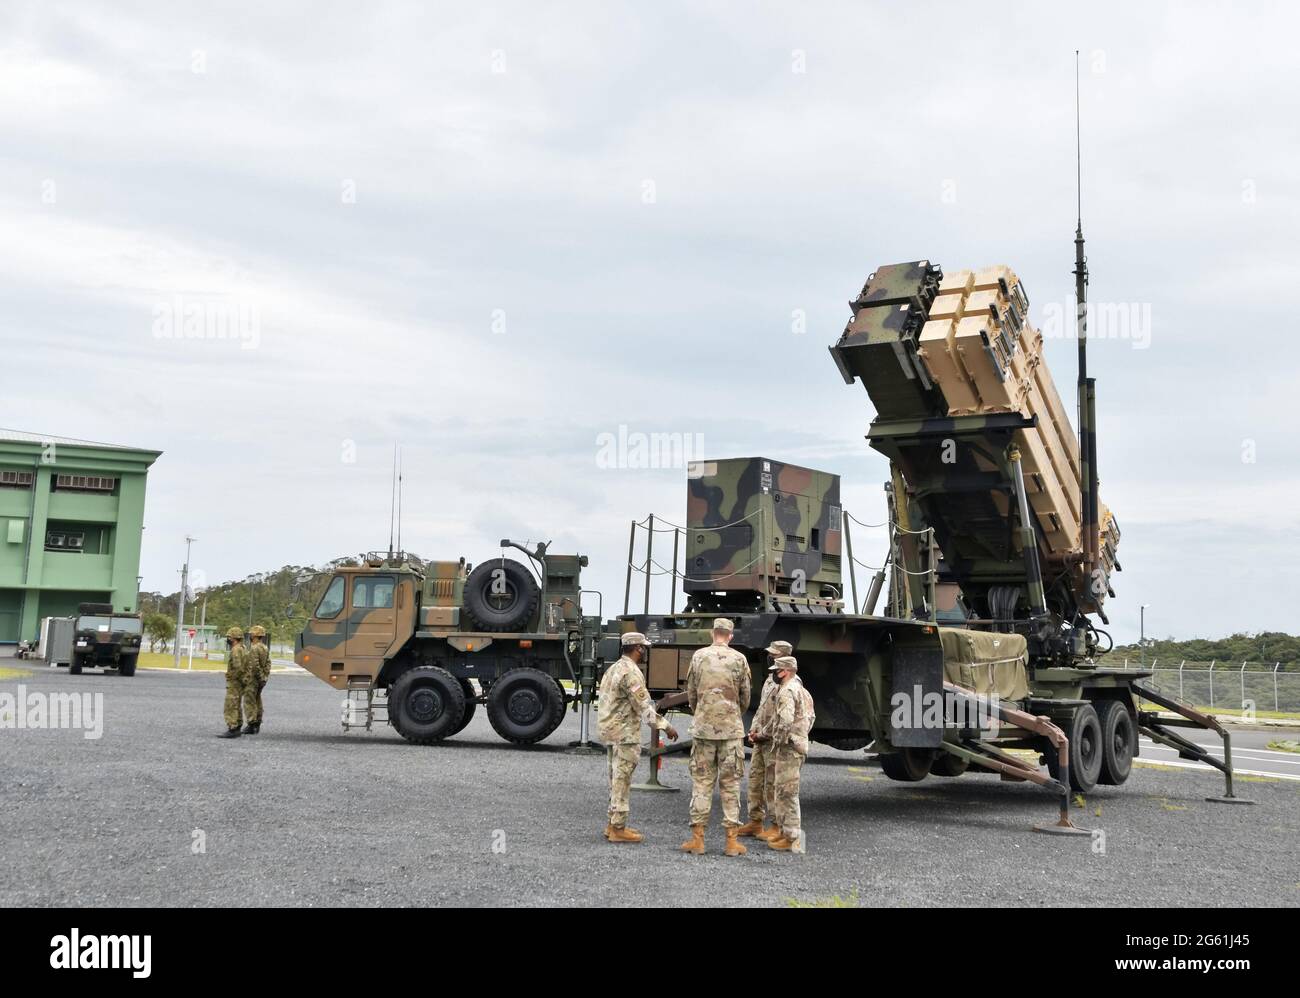 Amami, Japan. 01st July, 2021. The U.S. Army's Patriot Advanced Capability-3 (PAC-3) system is displayed during a joint US-Japan military training exercise titled 'Orient Shield 21' at Camp Amami in Amami Oshima Island, Kagoshima-Prefecture, Japan on Thursday, July 1, 2021. This is the first time the PAC-3 missile system has been deployed on Amami Oshima. Photo by Keizo Mori/UPI Credit: UPI/Alamy Live News Stock Photo